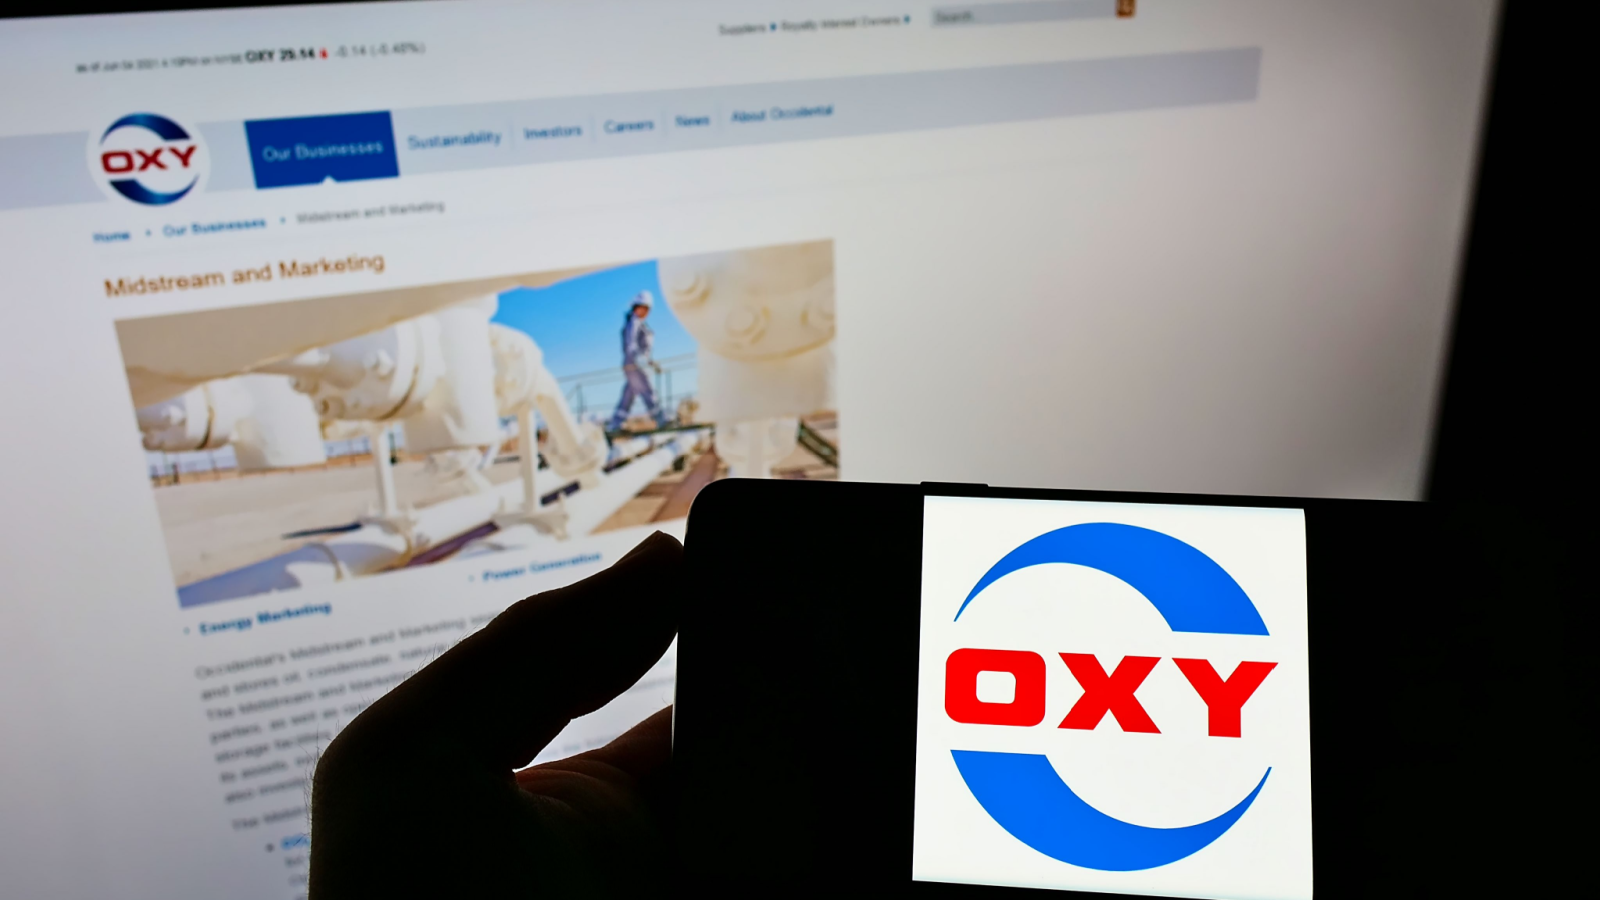 Person holding cellphone with logo of American company Occidental Petroleum Corp. (OXY Stock) on screen in front of website. Focus on phone display. Unmodified photo.